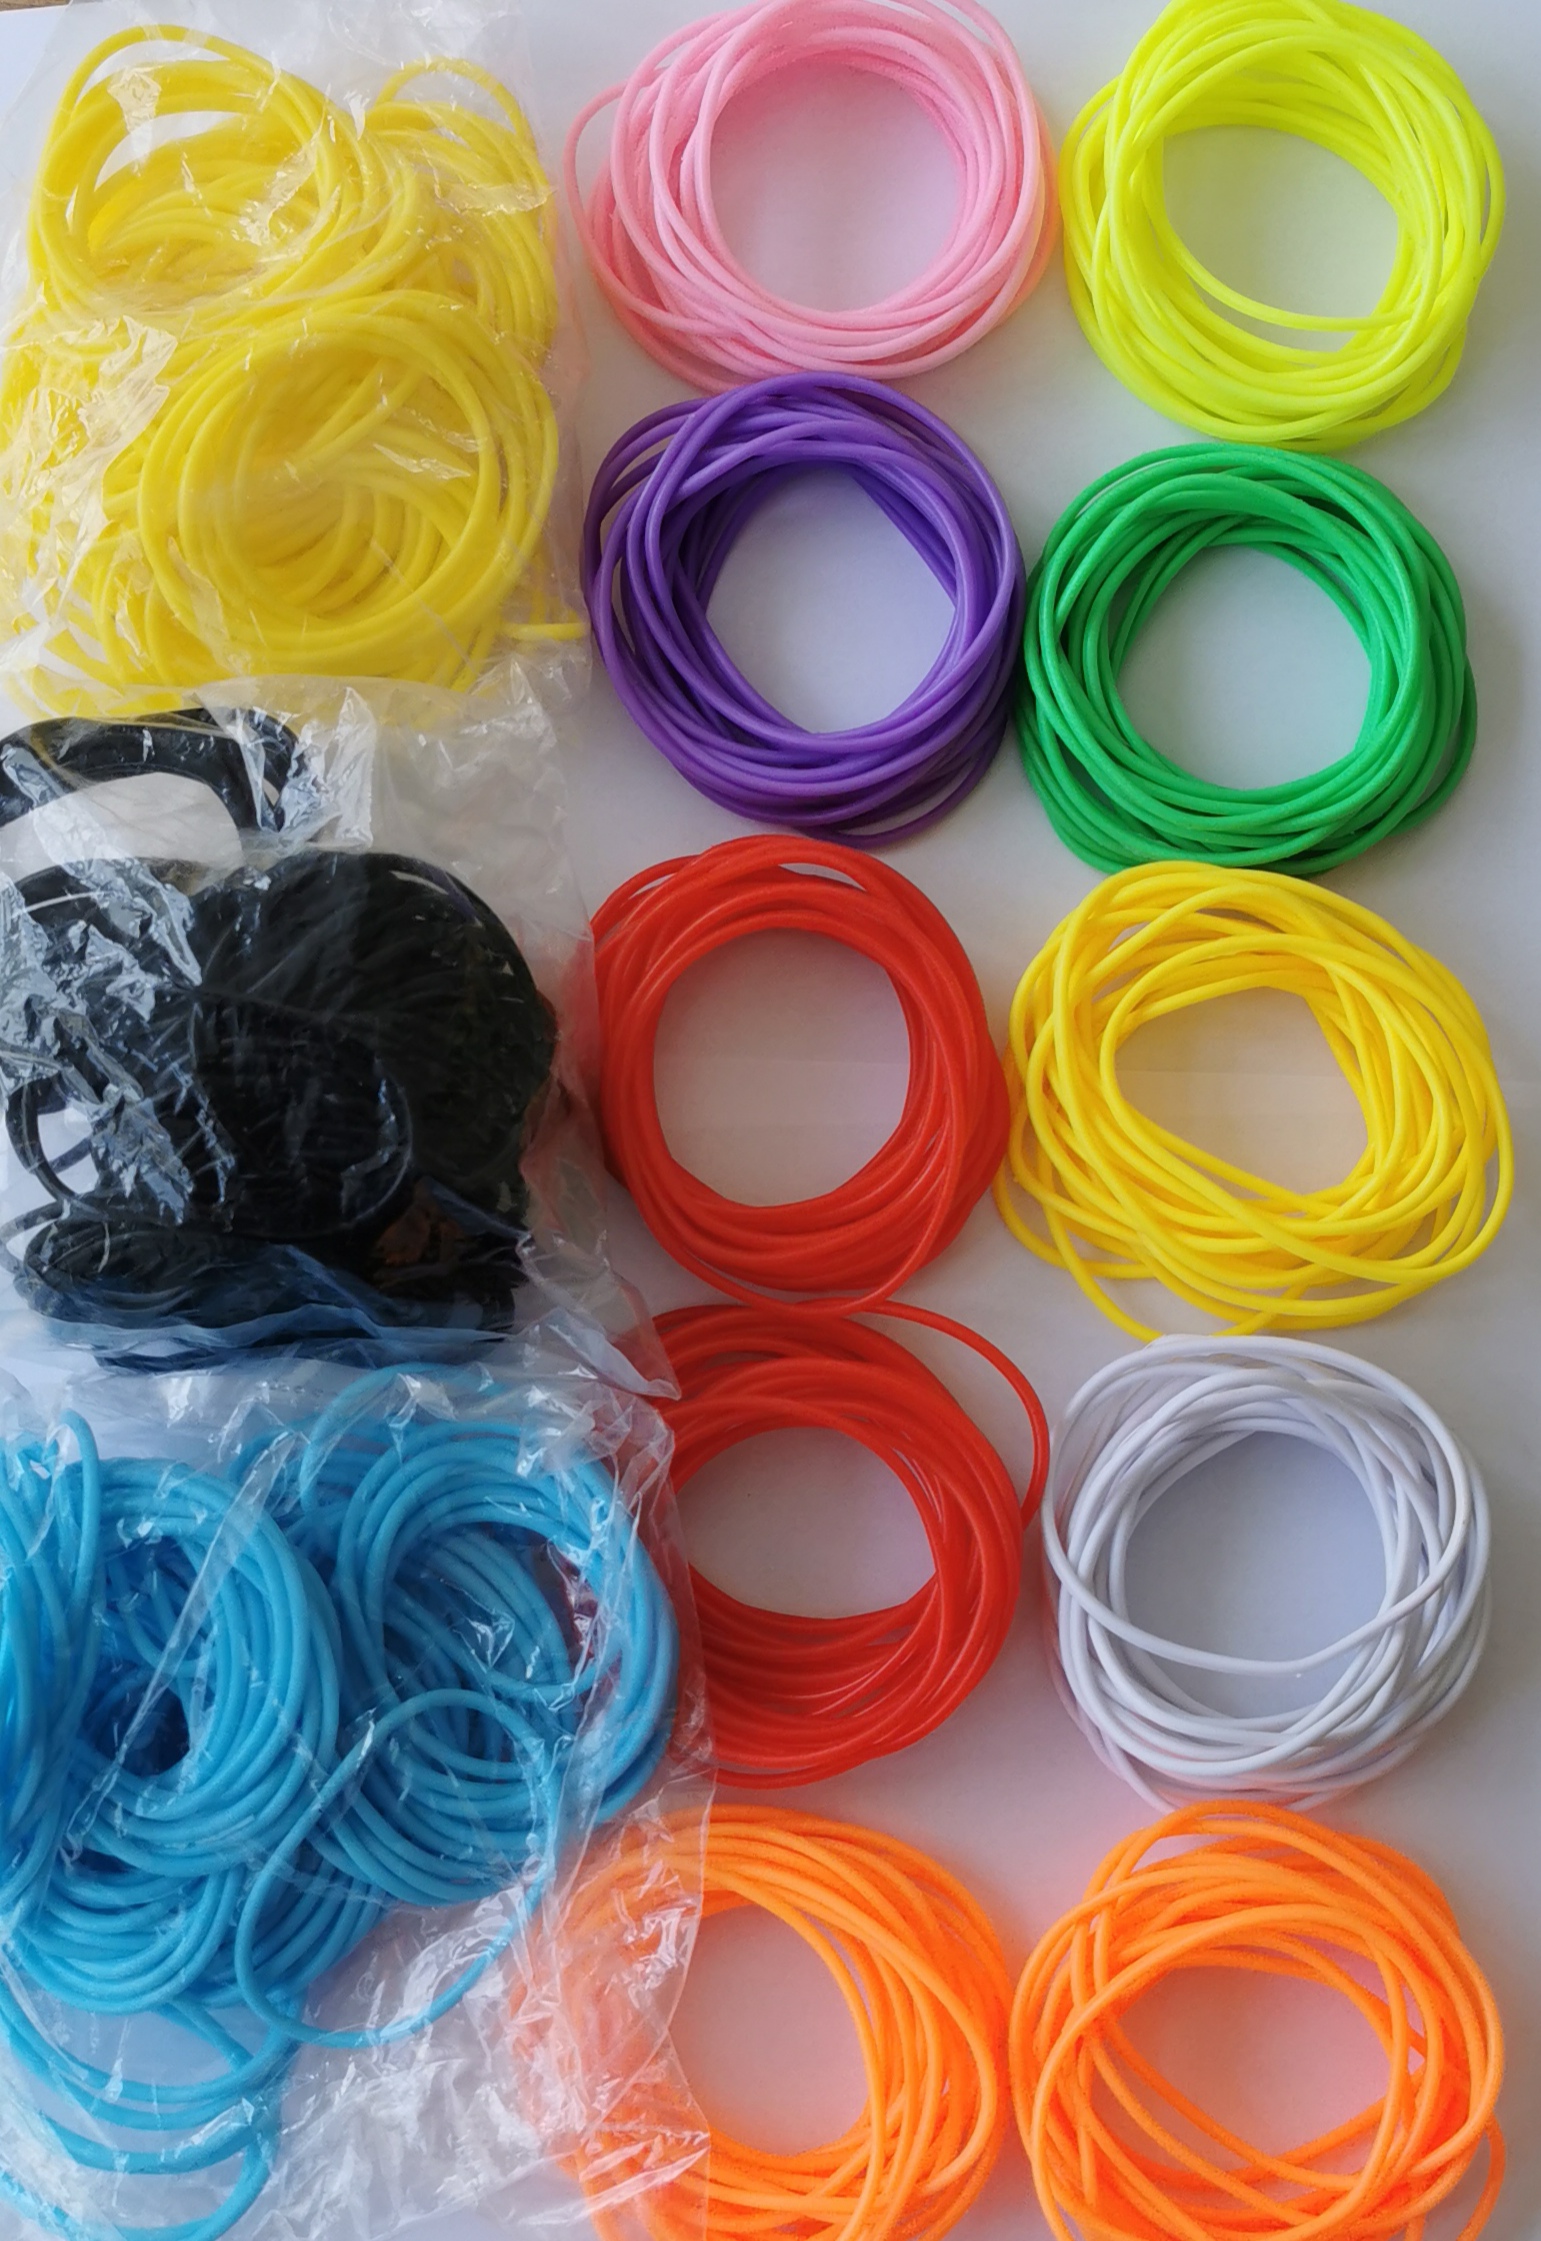 Wholesale Joblot Of 500 Gummy Band Bracelets In Mixed Colours